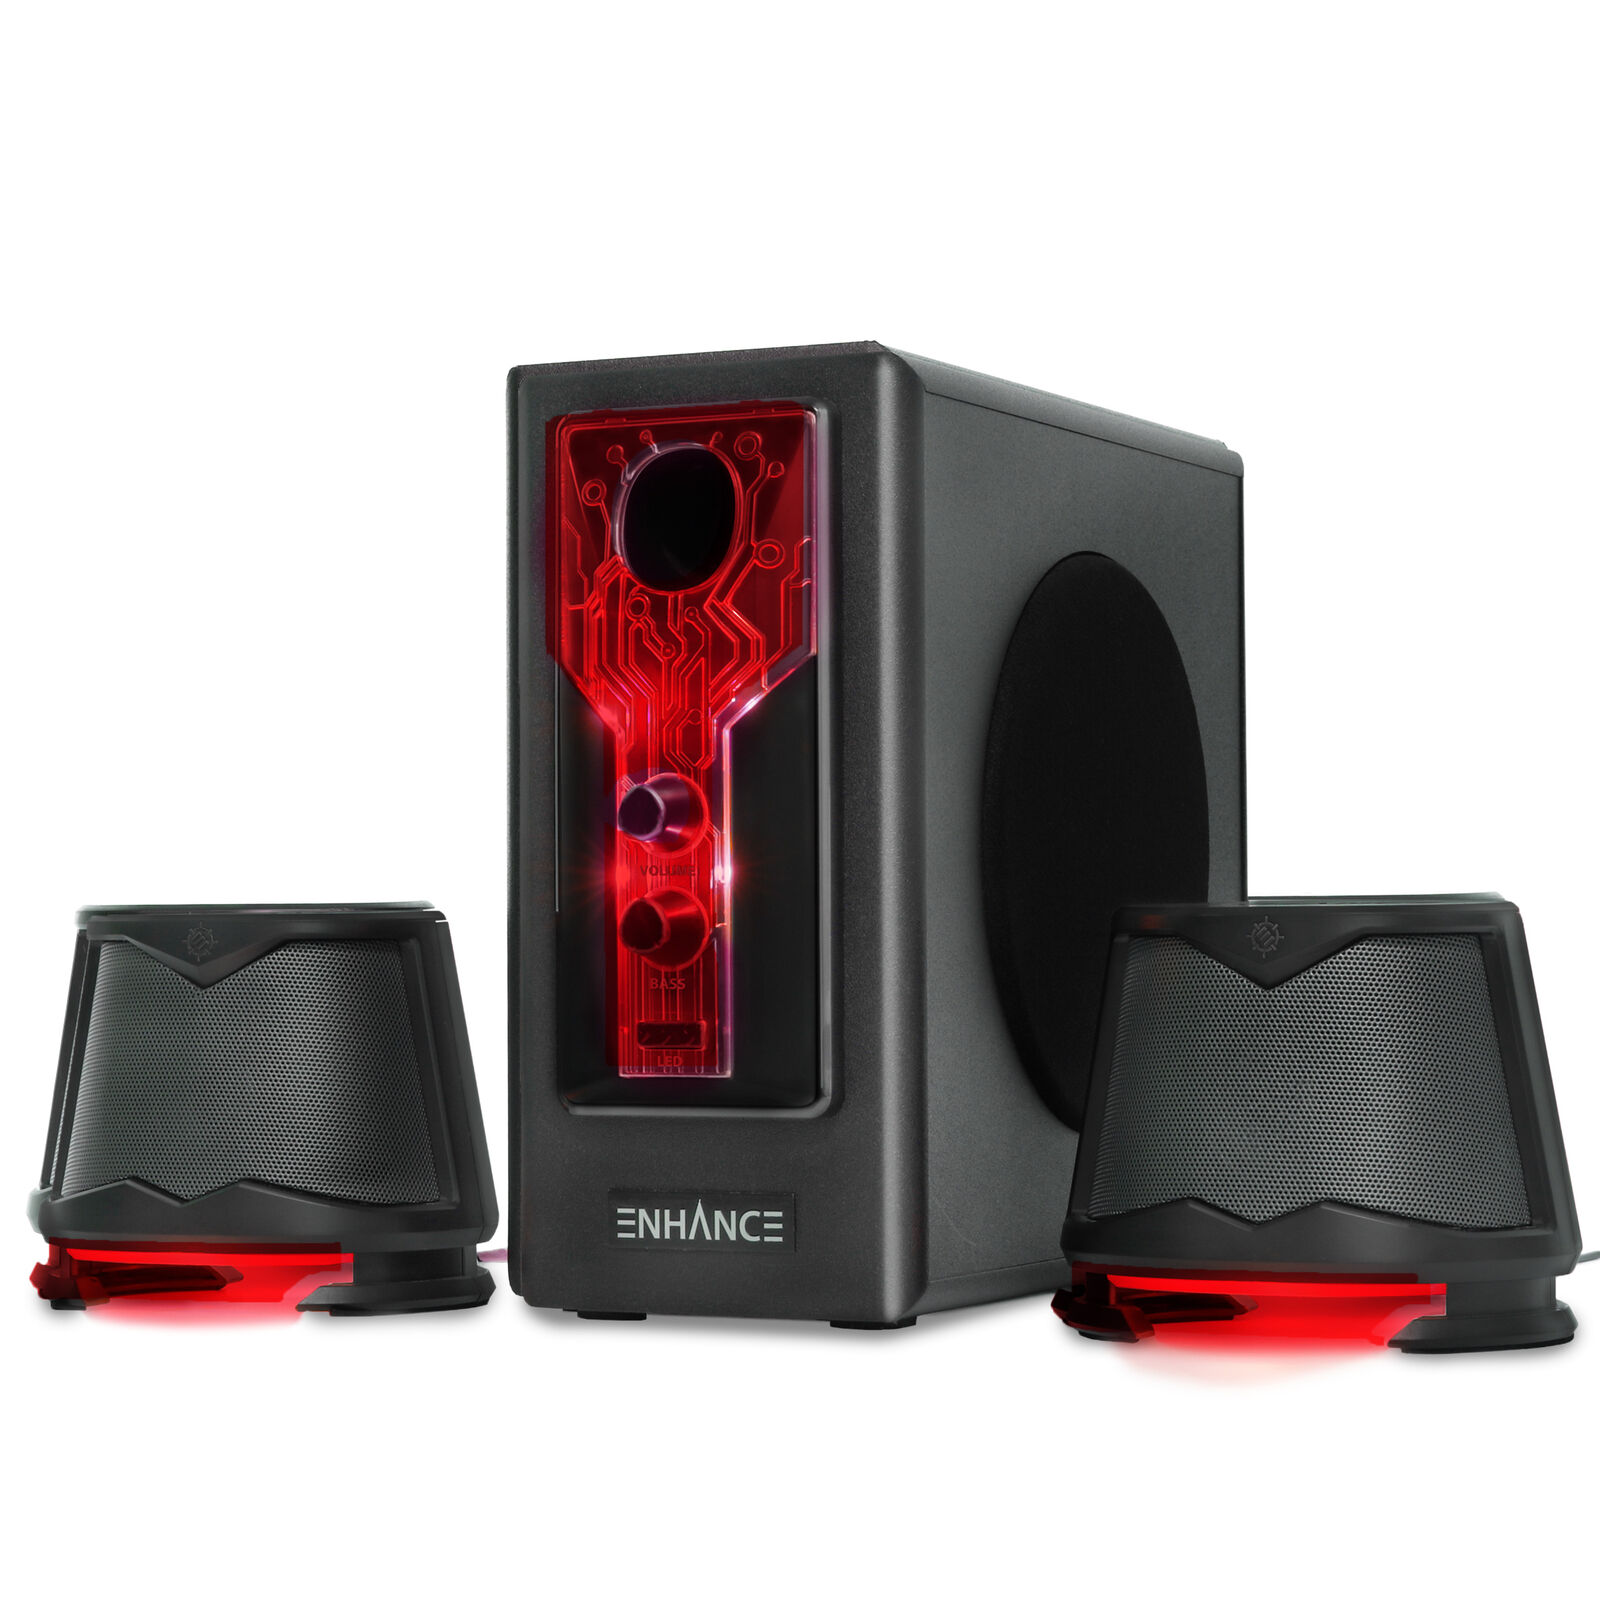 2.1 High Excursion Computer Speakers with Subwoofer - Red LED Gaming Speakers